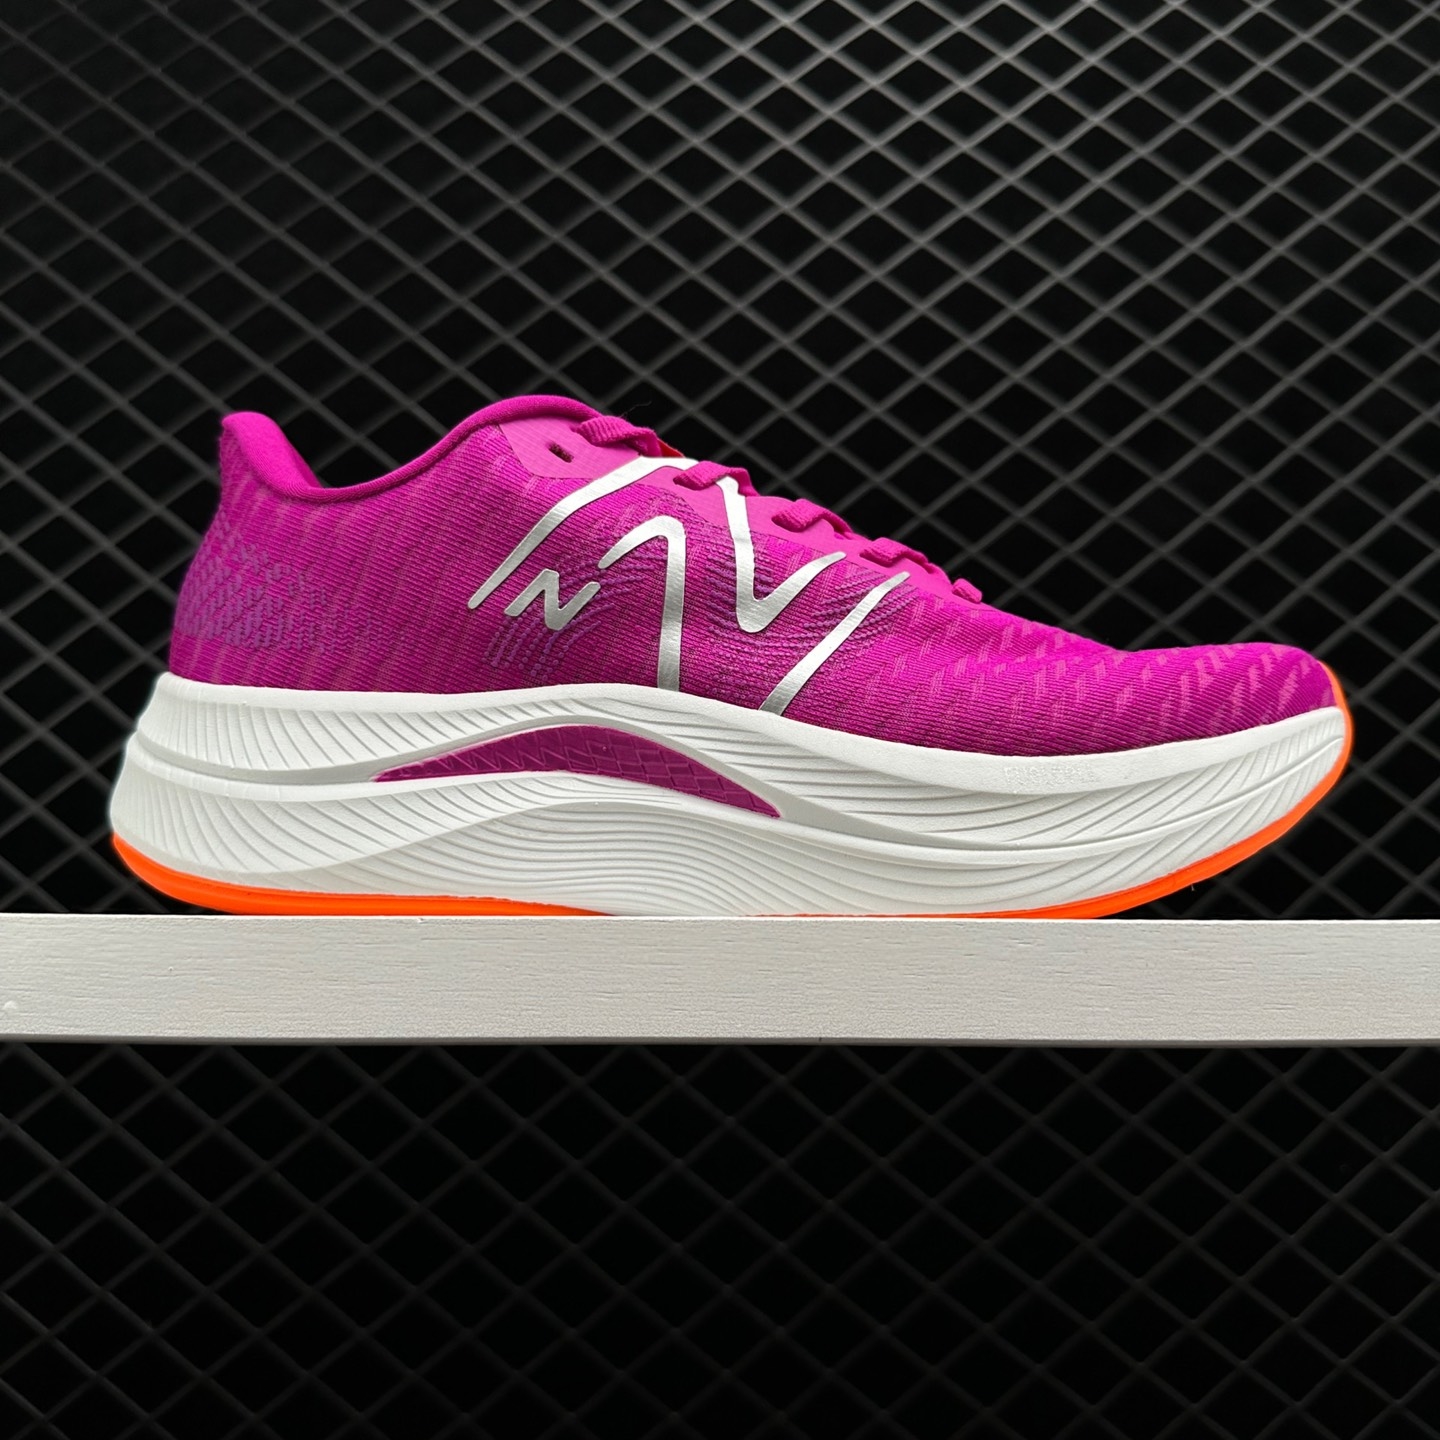 New Balance FuelCell Propel v4 'Cosmic Rose Orange' WFCPRLP4 Shoes - Latest Release